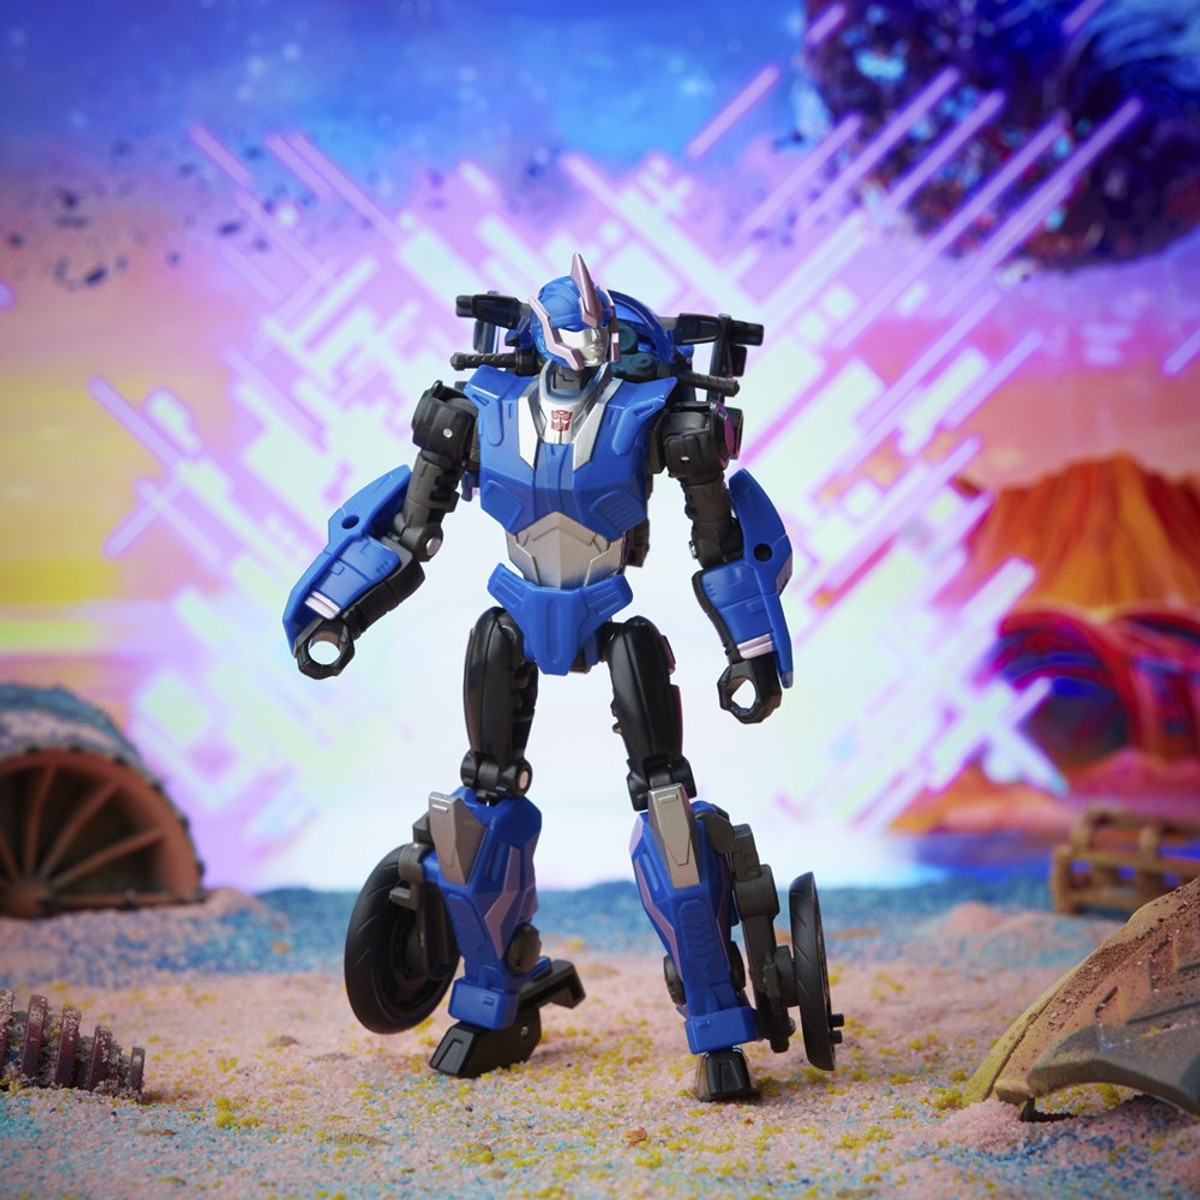 Generations Legacy Knock Out Toy Review